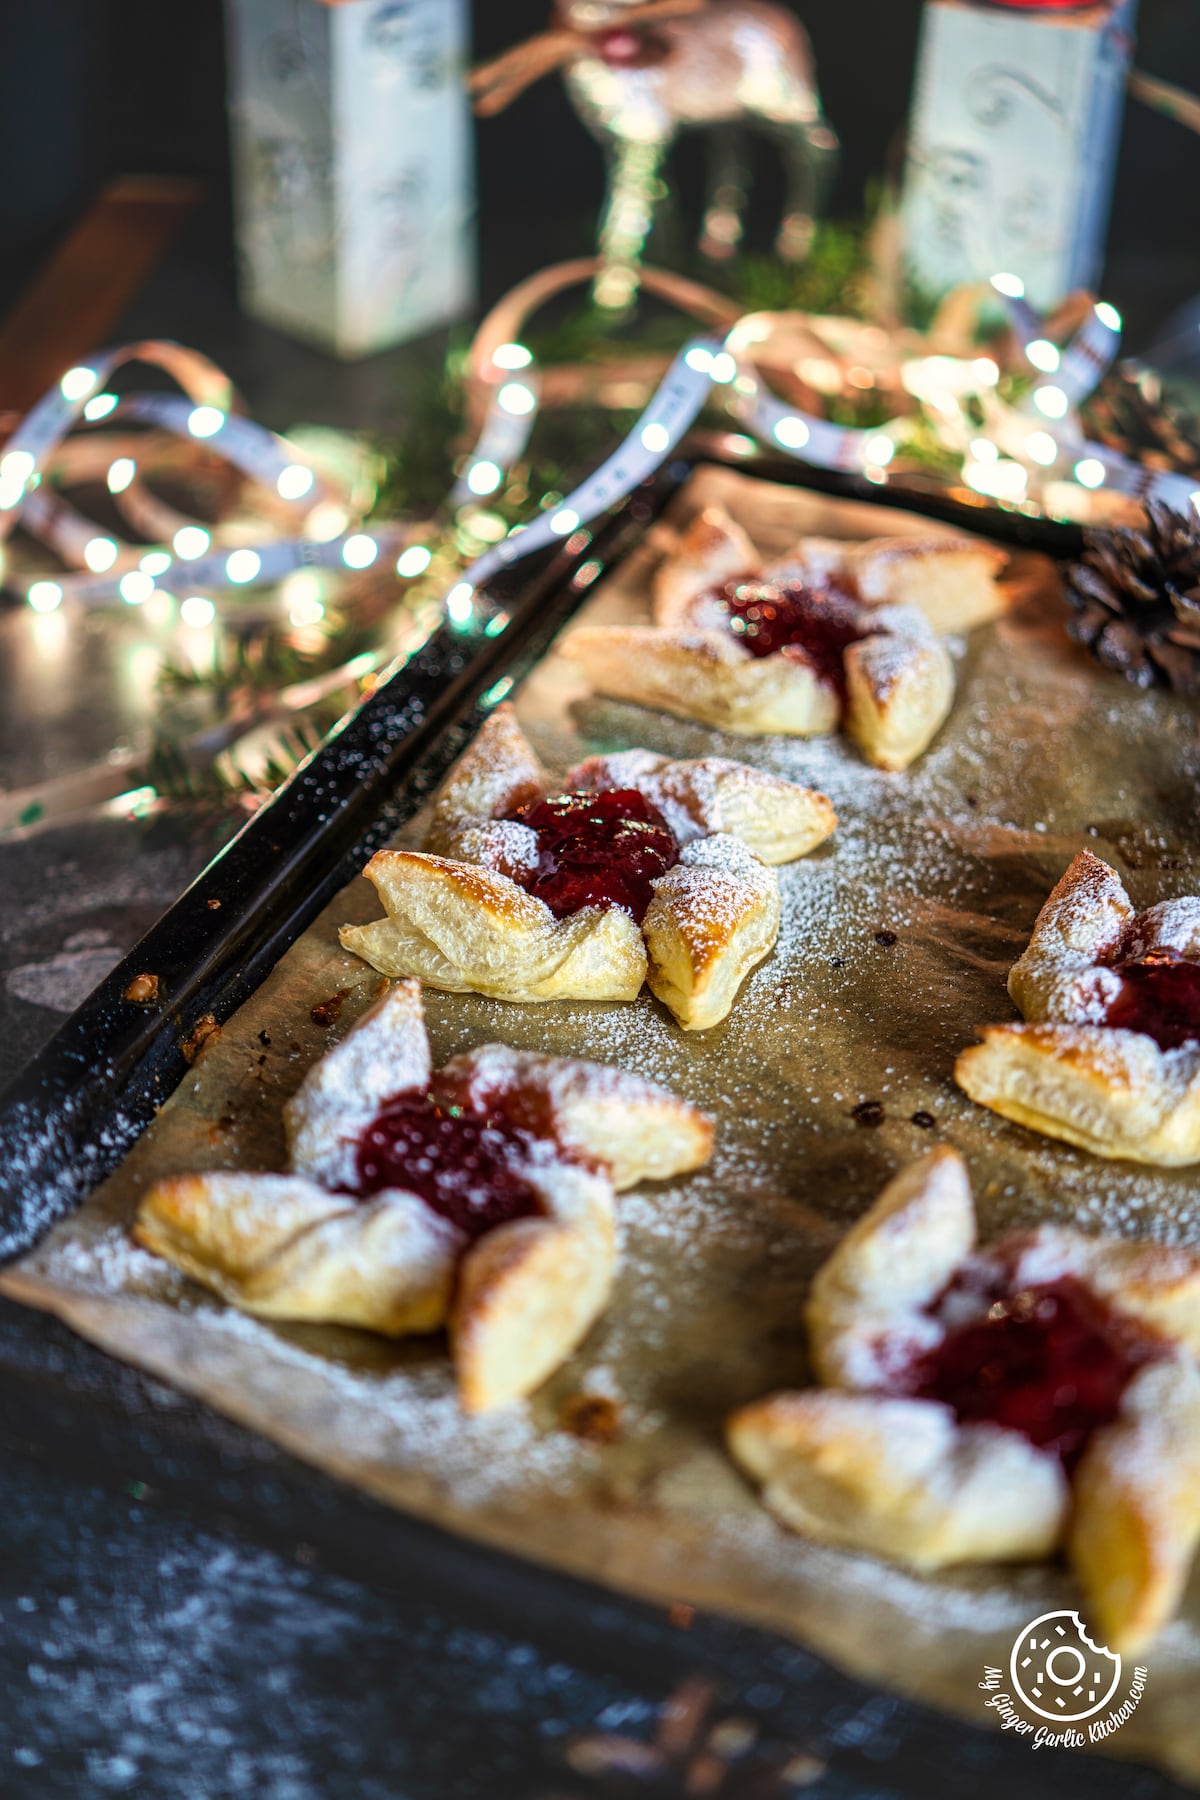 5 Joulutorttu - Finnish Christmas Tarts in a baking sheets with bouquet lights in the background